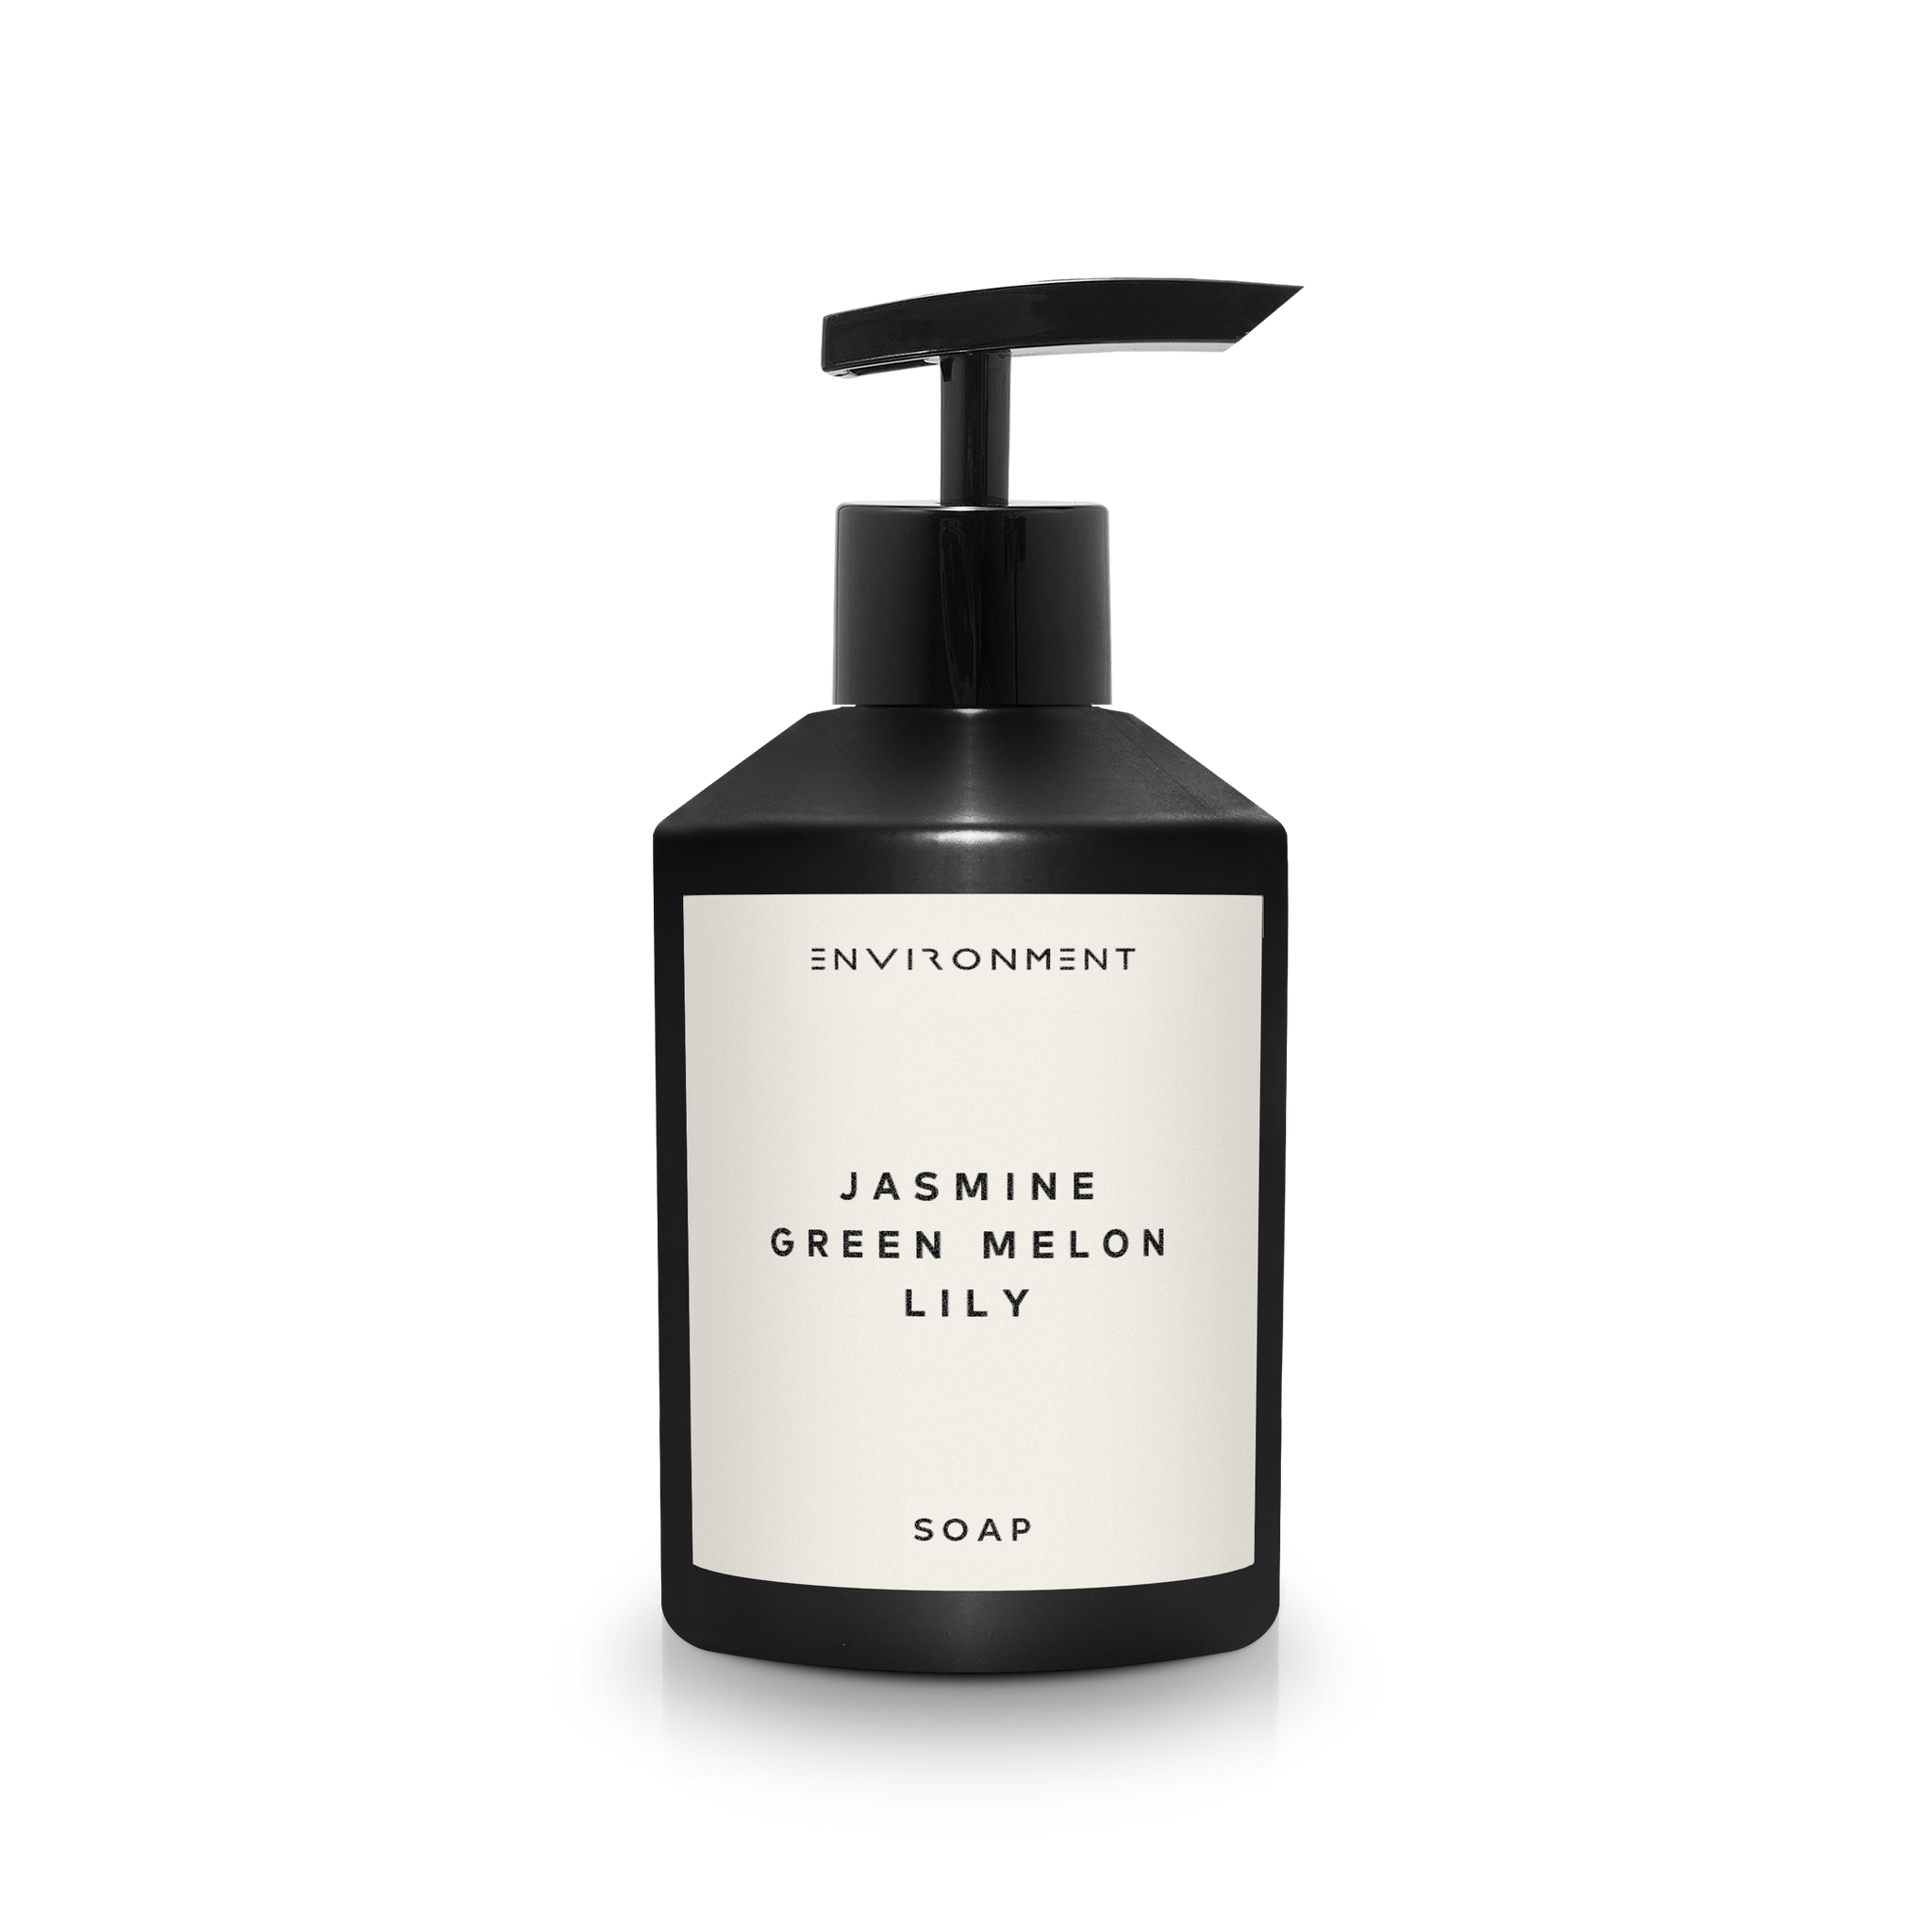 Jasmine | Green Melon | Lily Hand Soap (Inspired by The Wynn Hotel®)